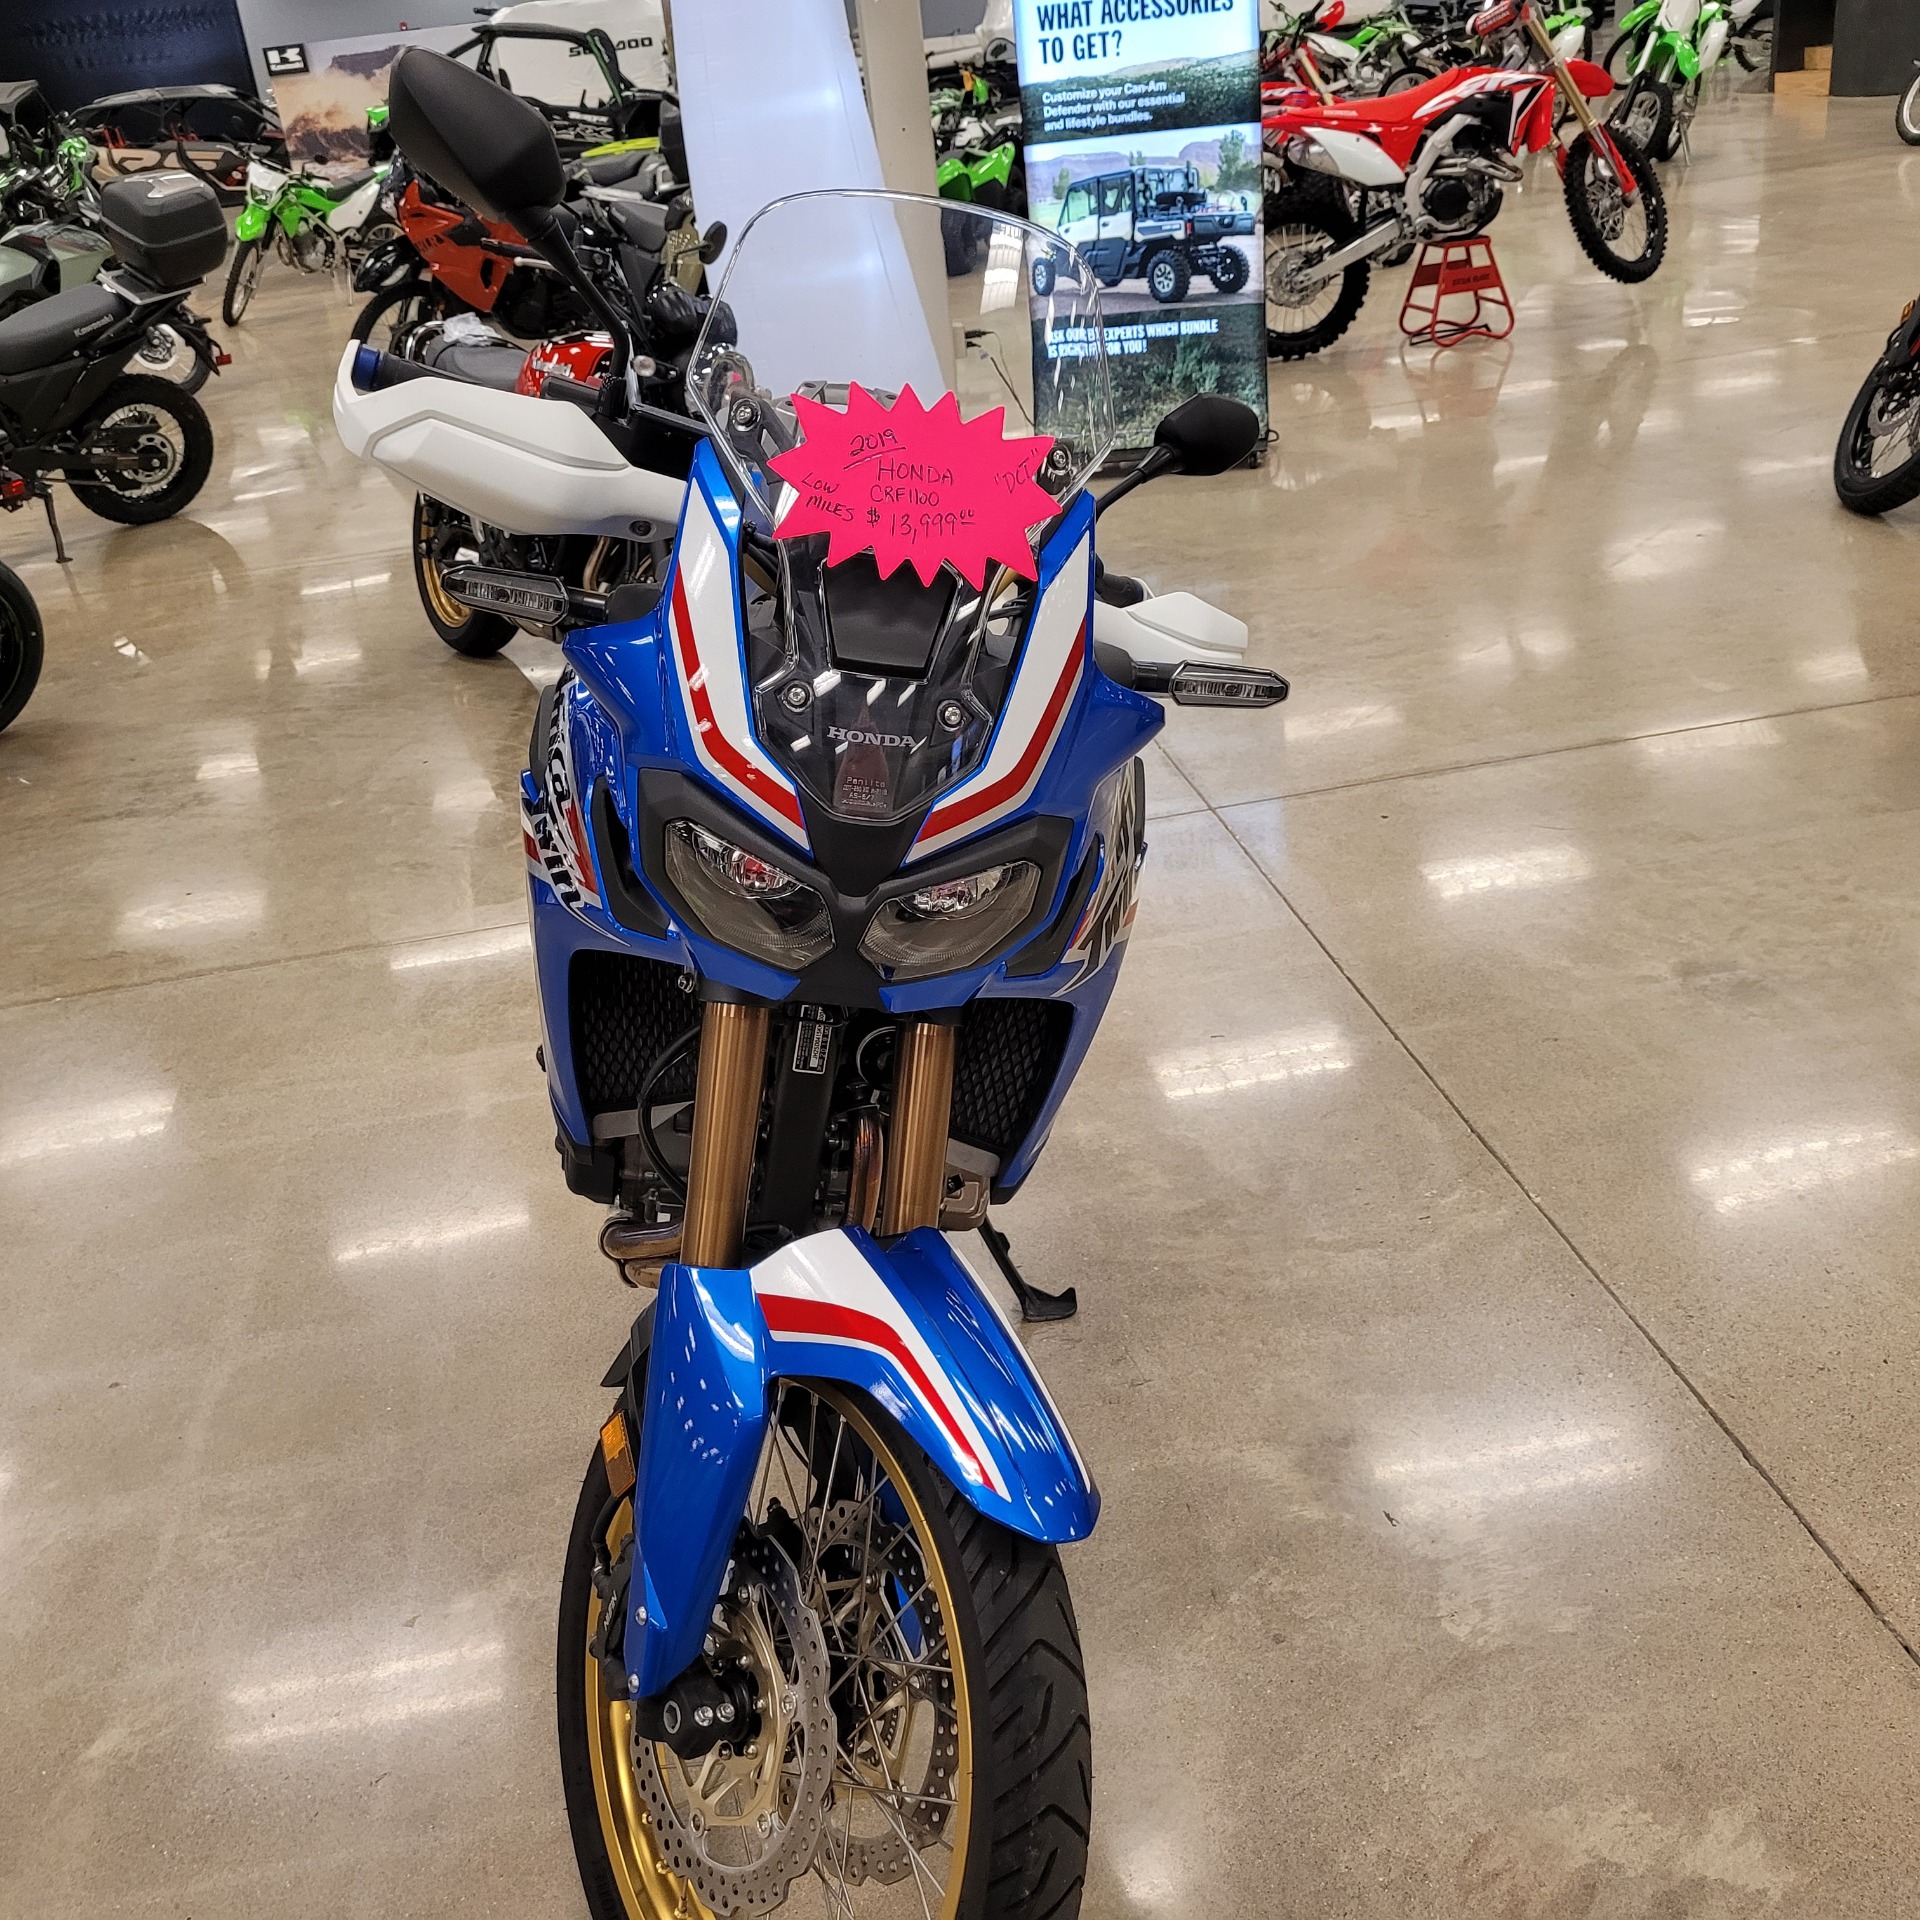 2019 Honda Africa Twin DCT in Middletown, Ohio - Photo 2